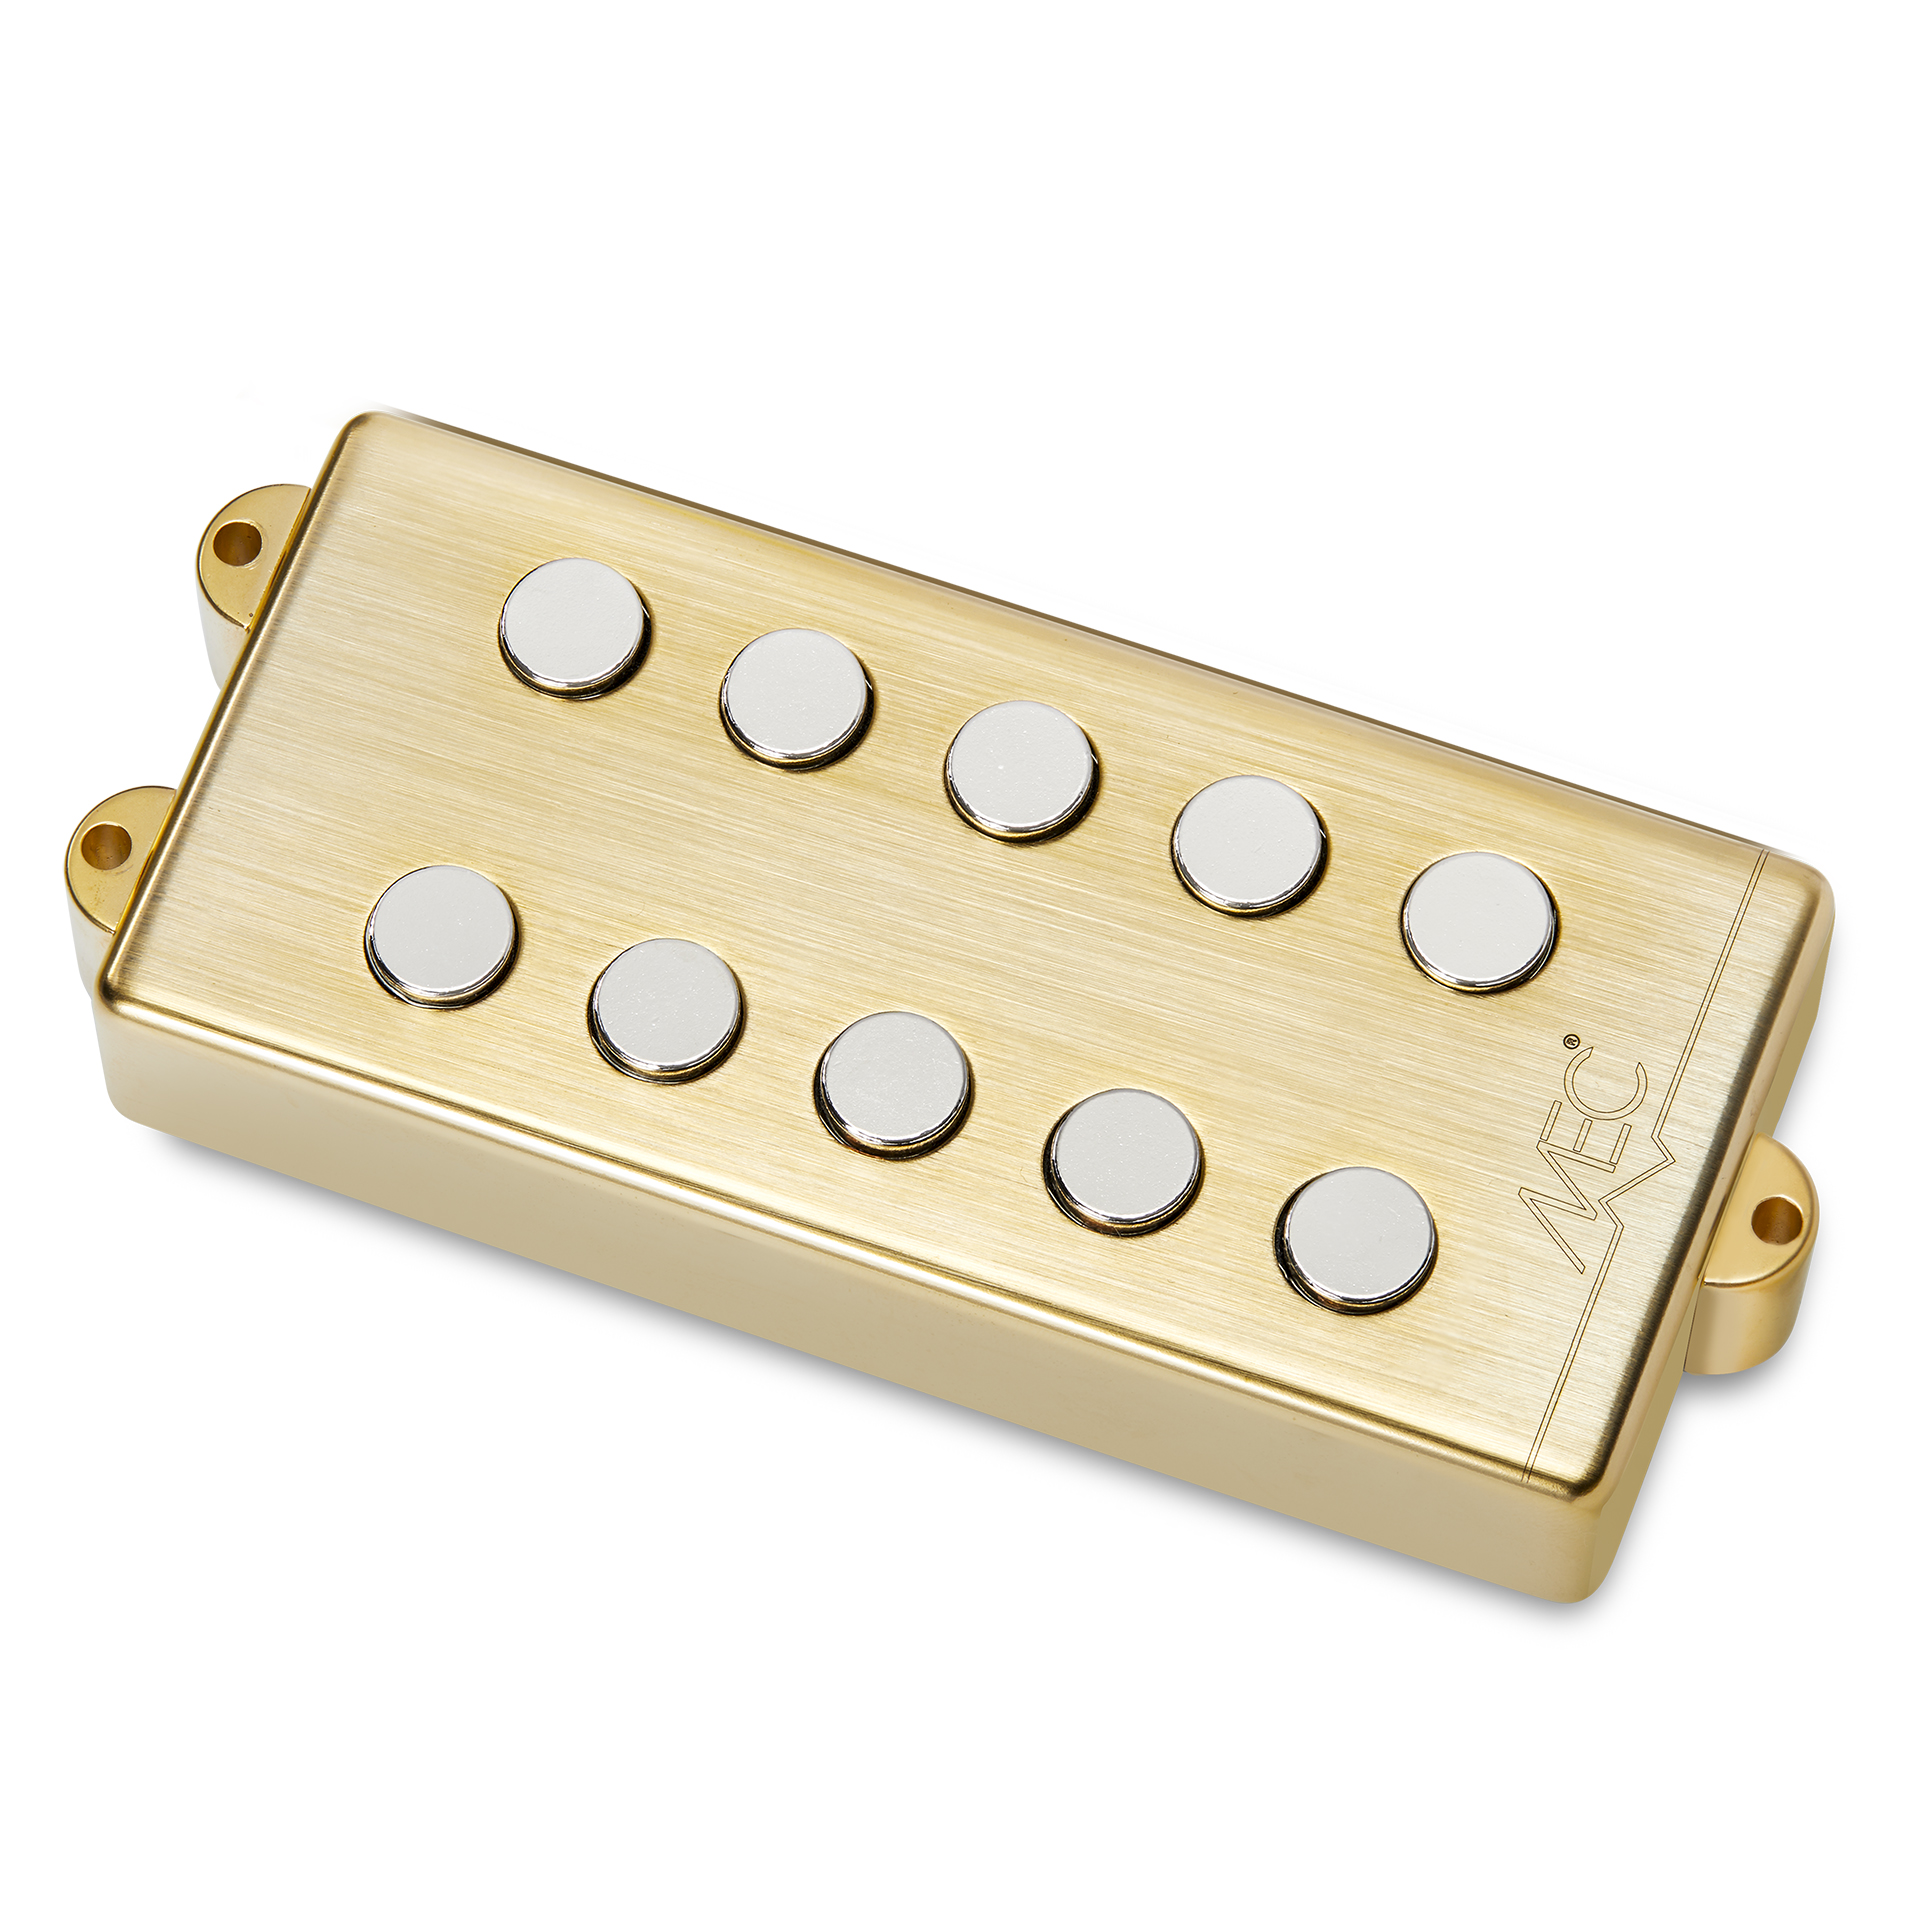 MEC Passive MM-Style Bass Pickup, Metal Cover, 5-String, Neck - Brushed Gold